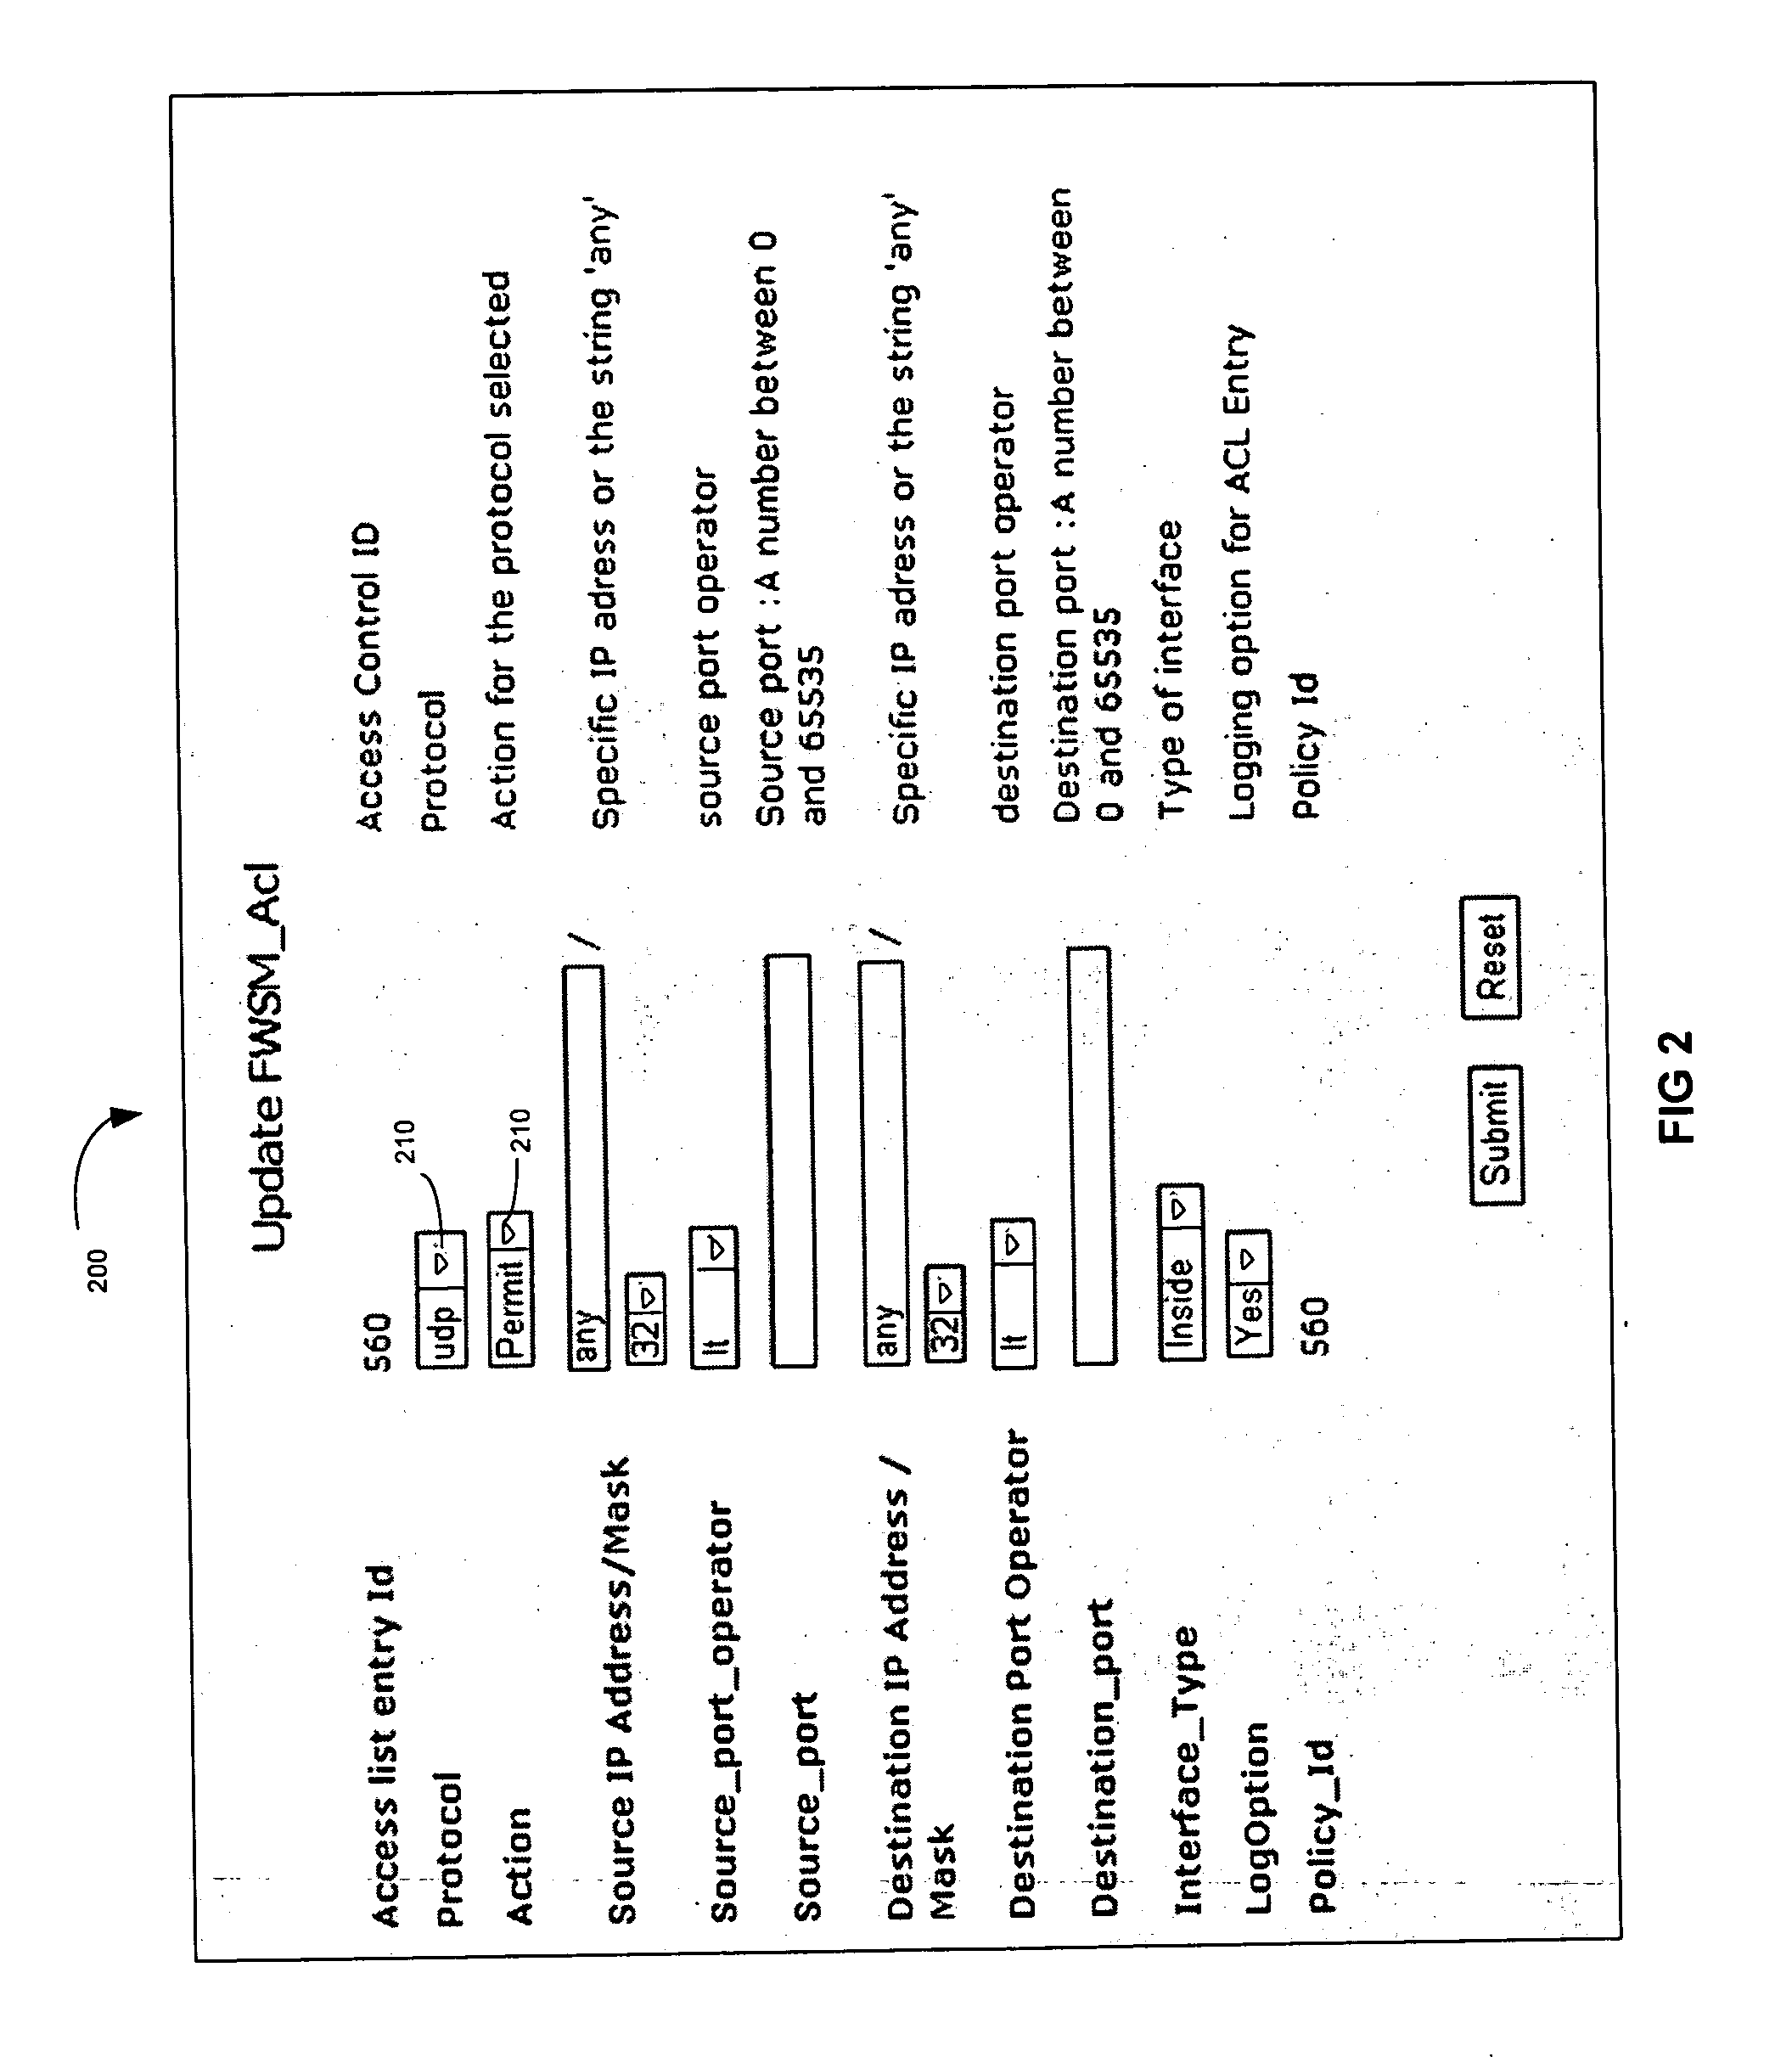 Vendor-neutral policy based mechanism for enabling firewall service in an MPLS-VPN service network